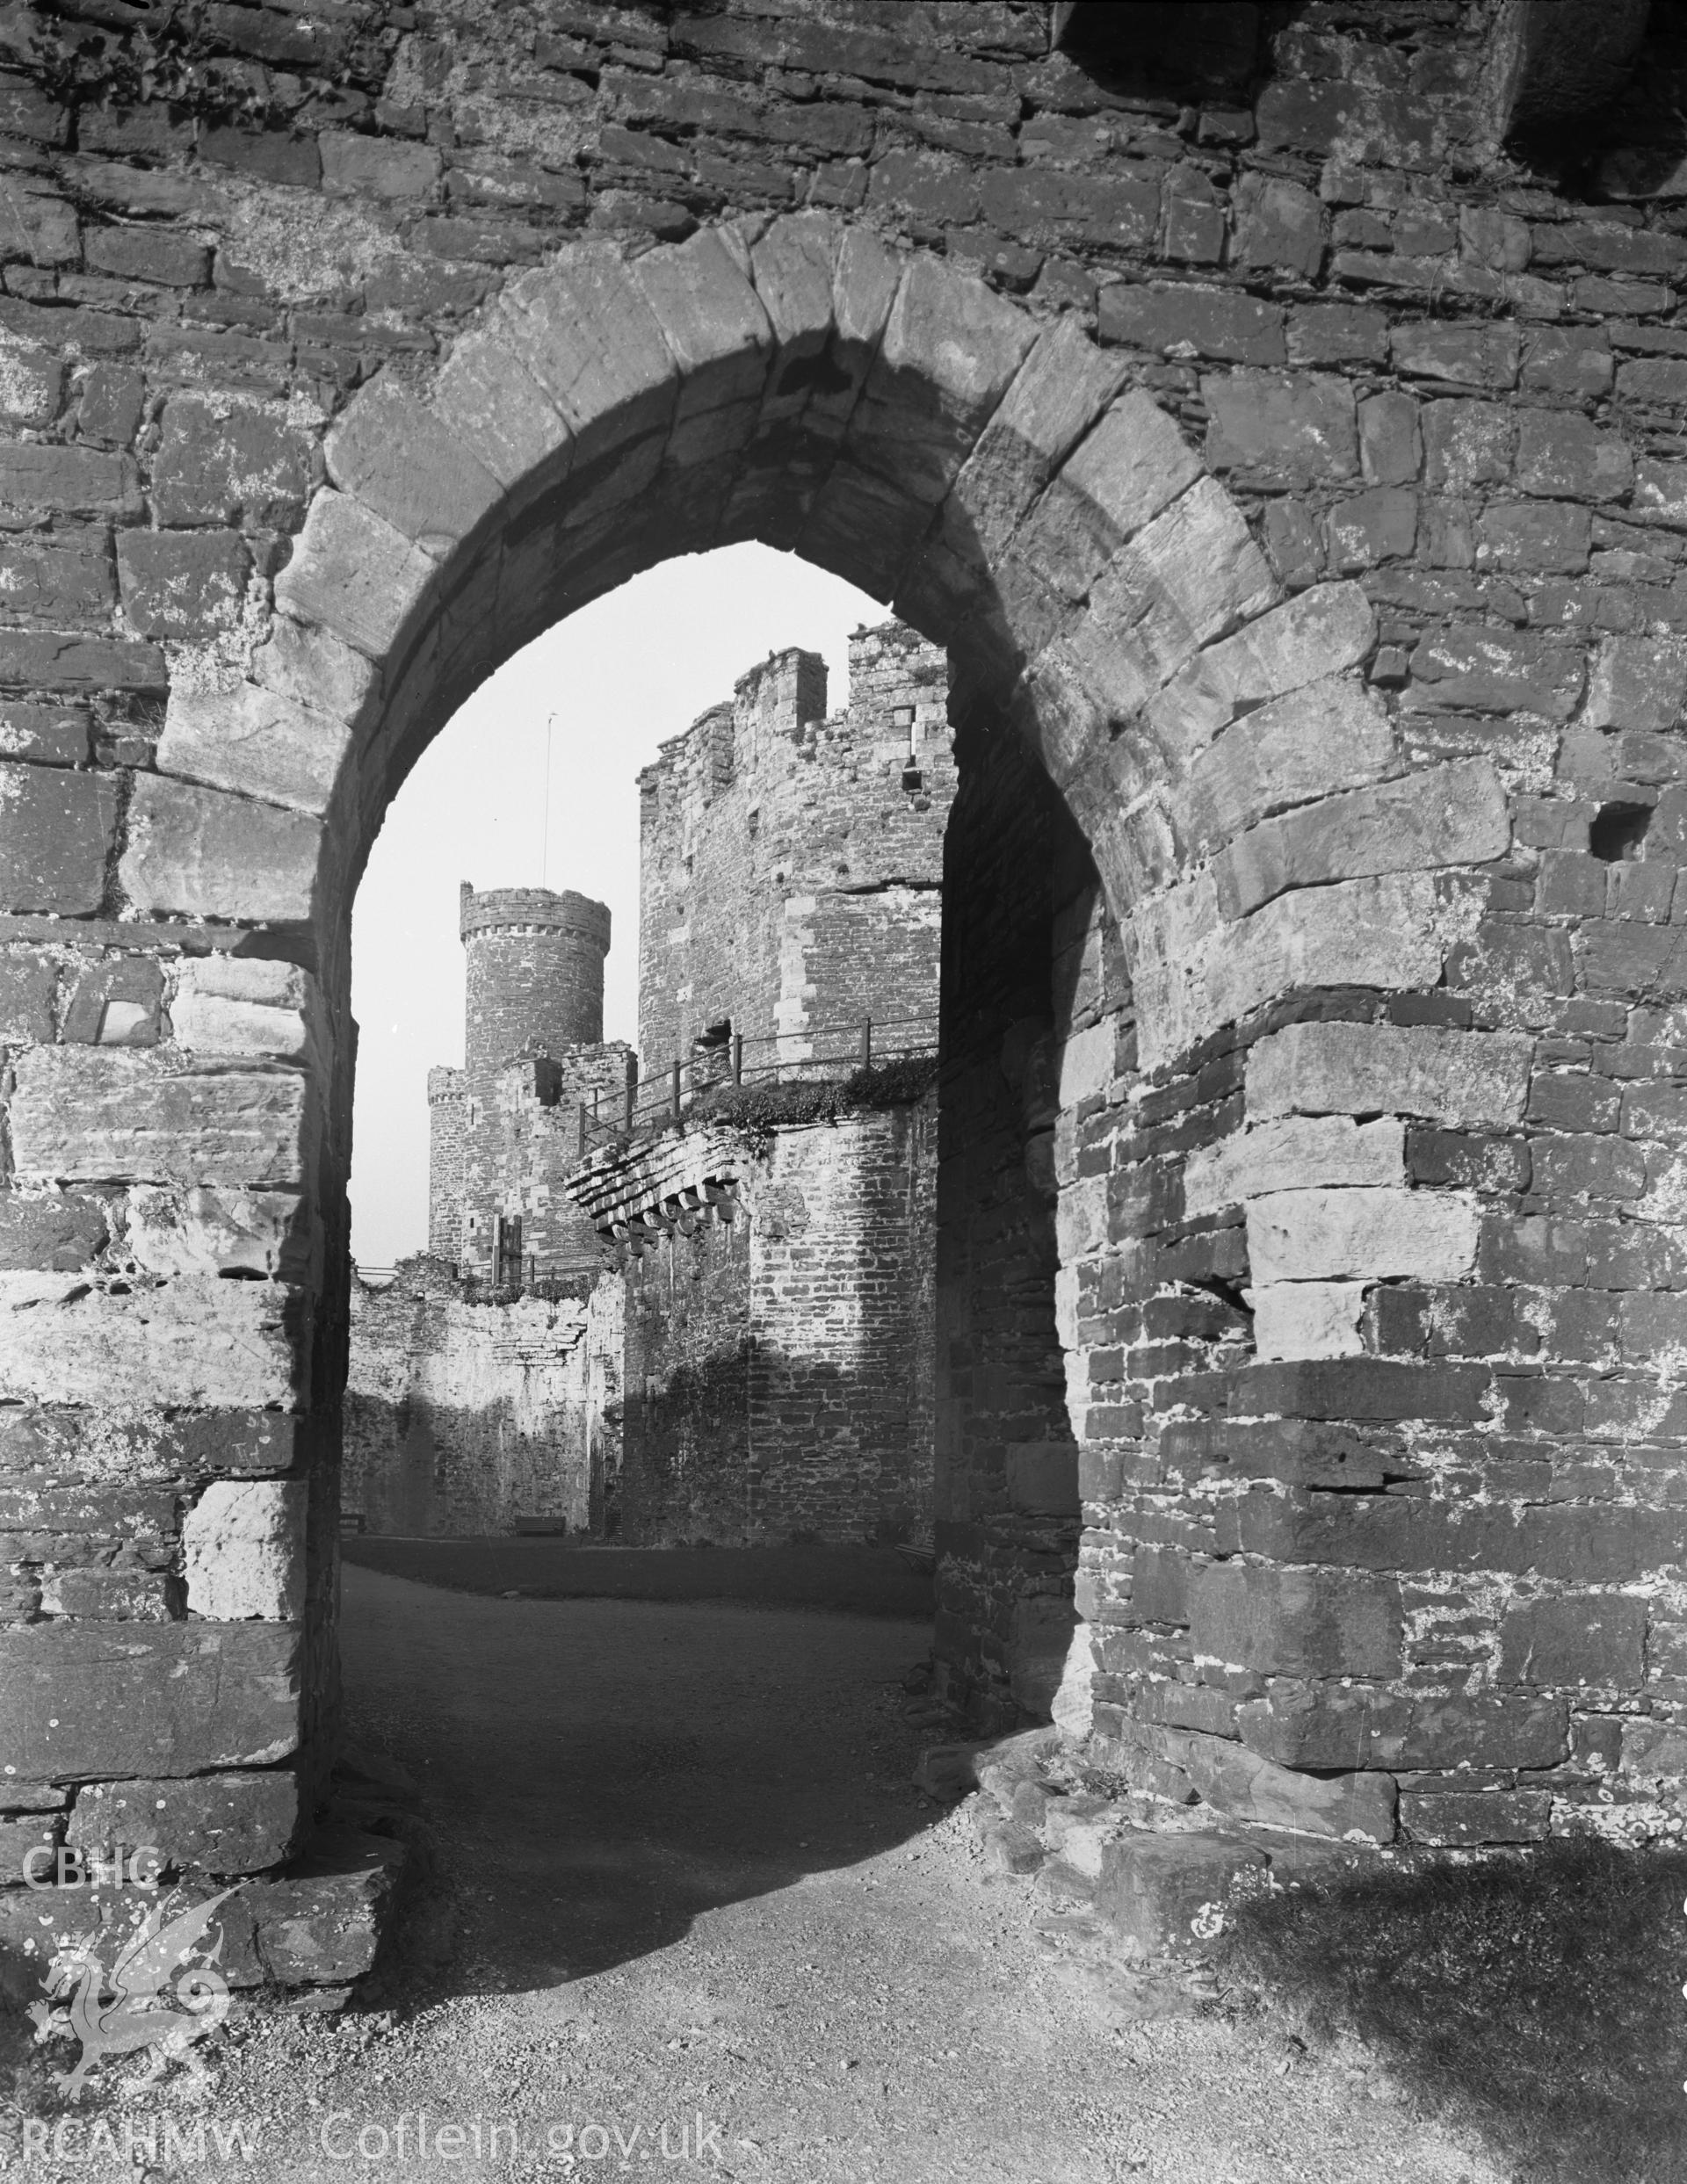 Exterior view of Conwy Castle, taken in 11.01.1952.